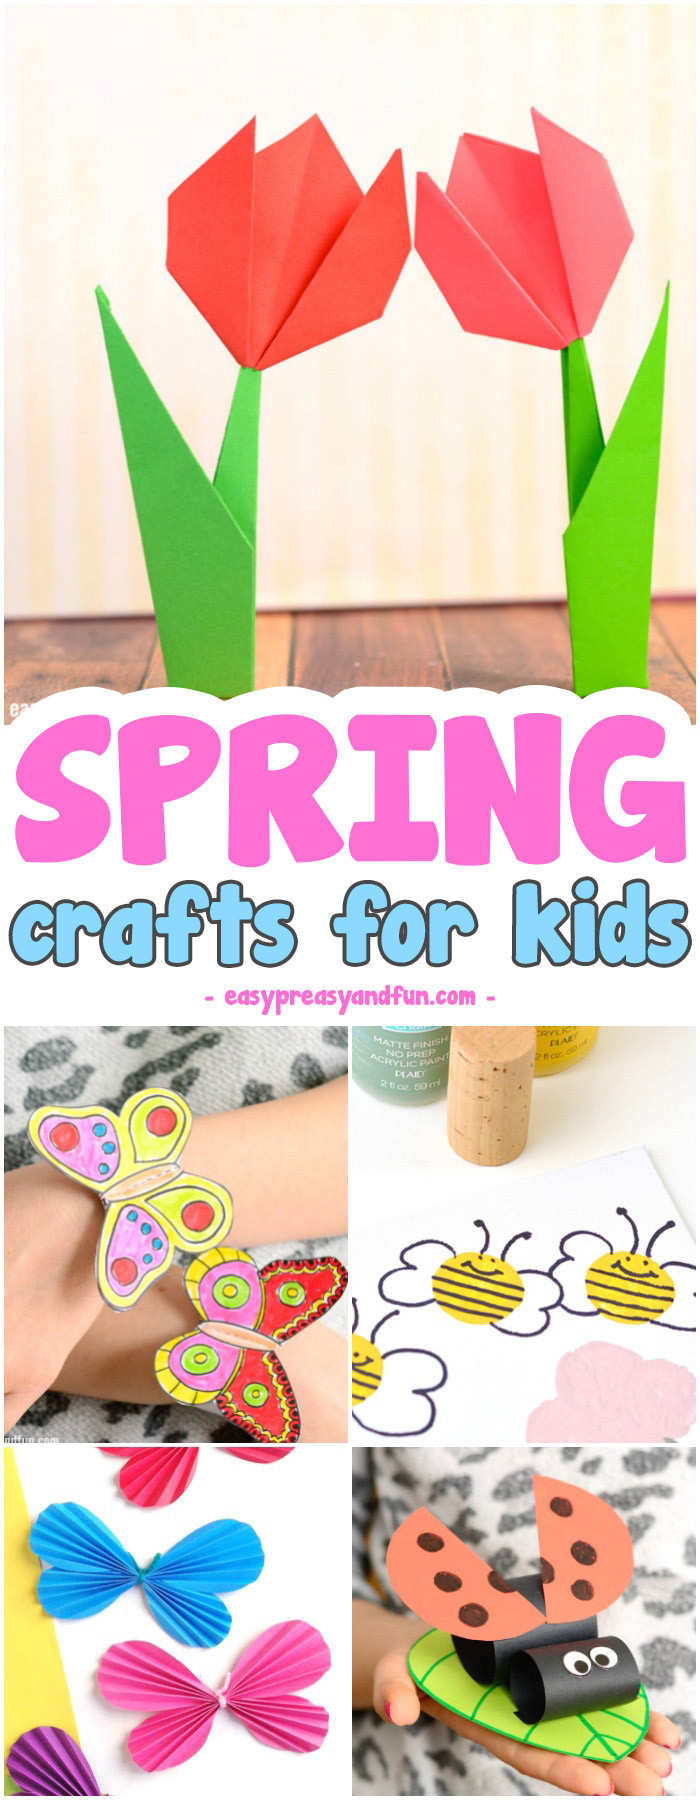 Toddlers Arts And Crafts Ideas
 Spring Crafts for Kids Art and Craft Project Ideas for